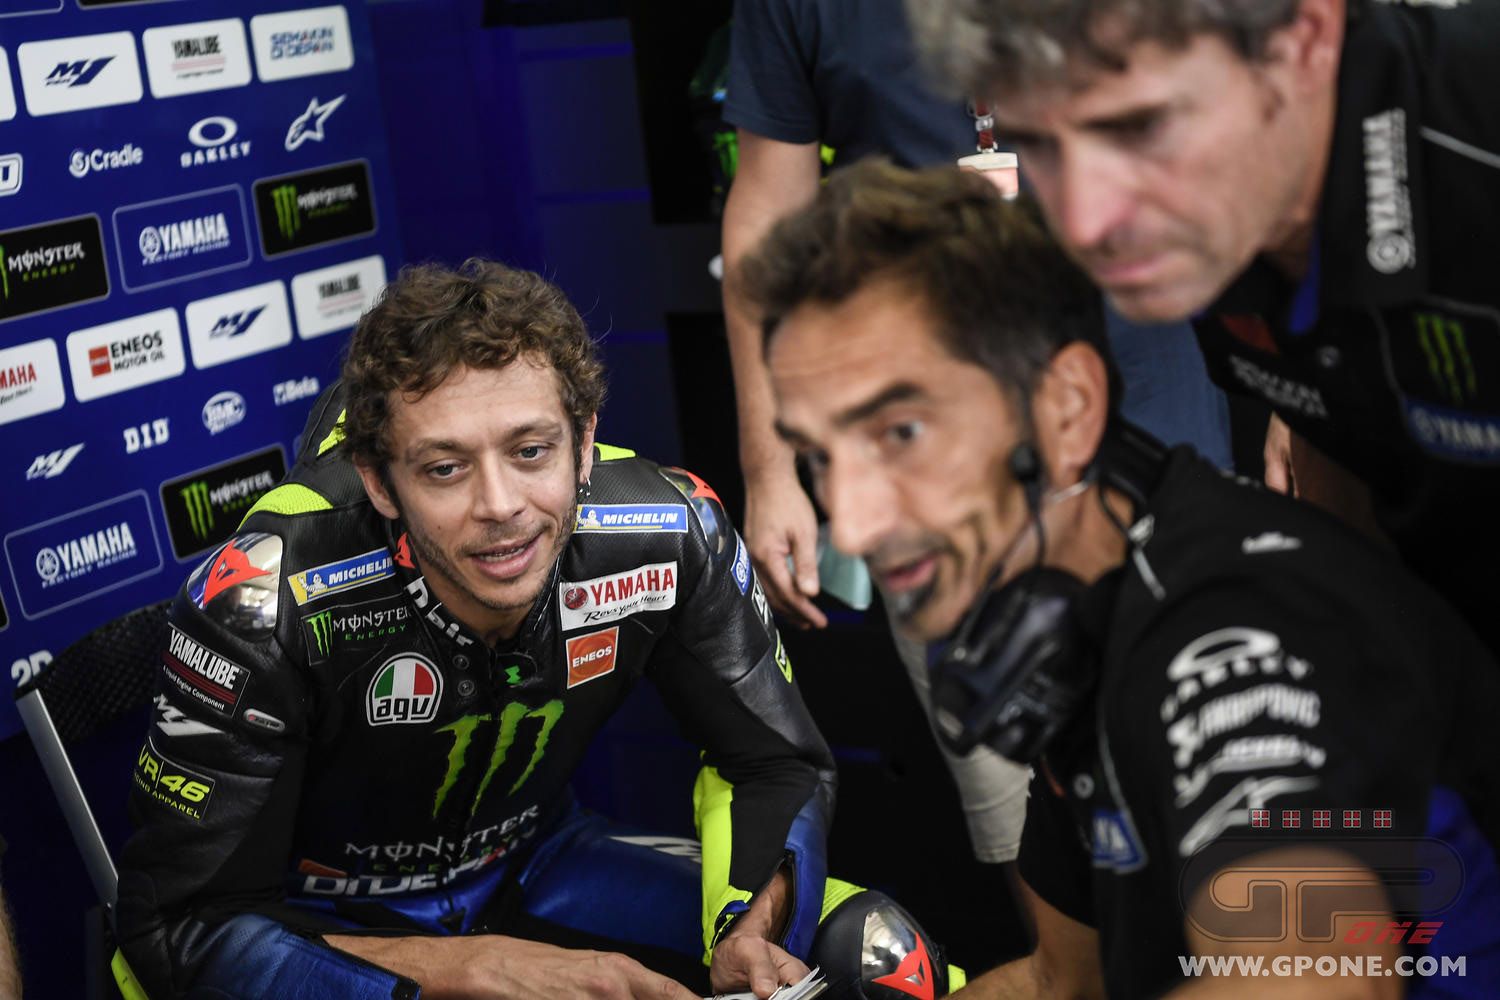 MotoGP, Flamigni and Marelli: Rossi's and Vinales' 